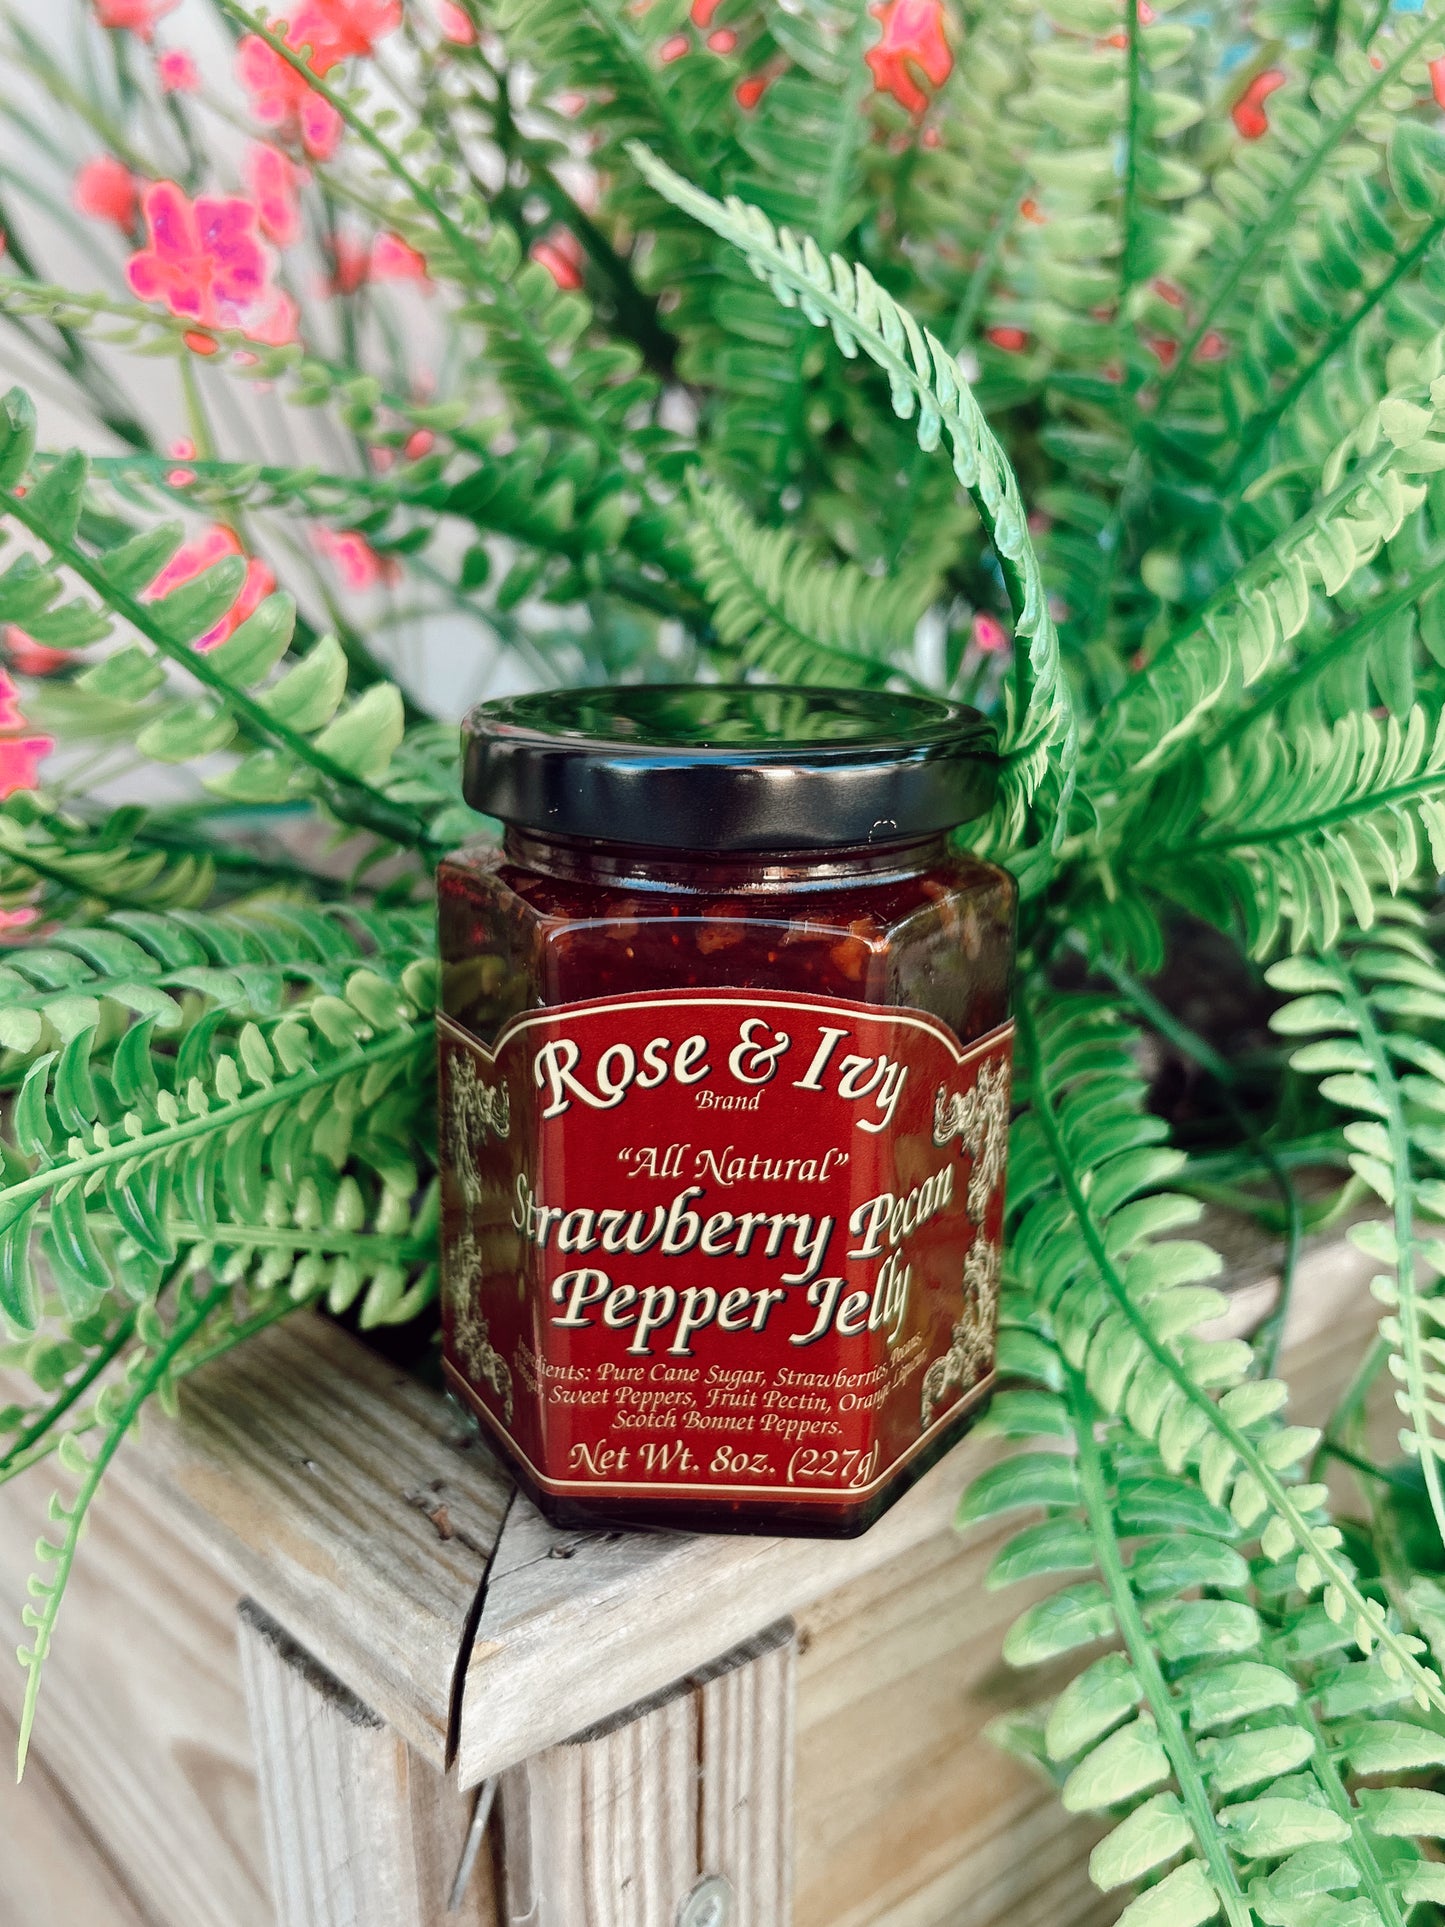 Rose & Ivy Strawberry Pecan Pepper Jelly